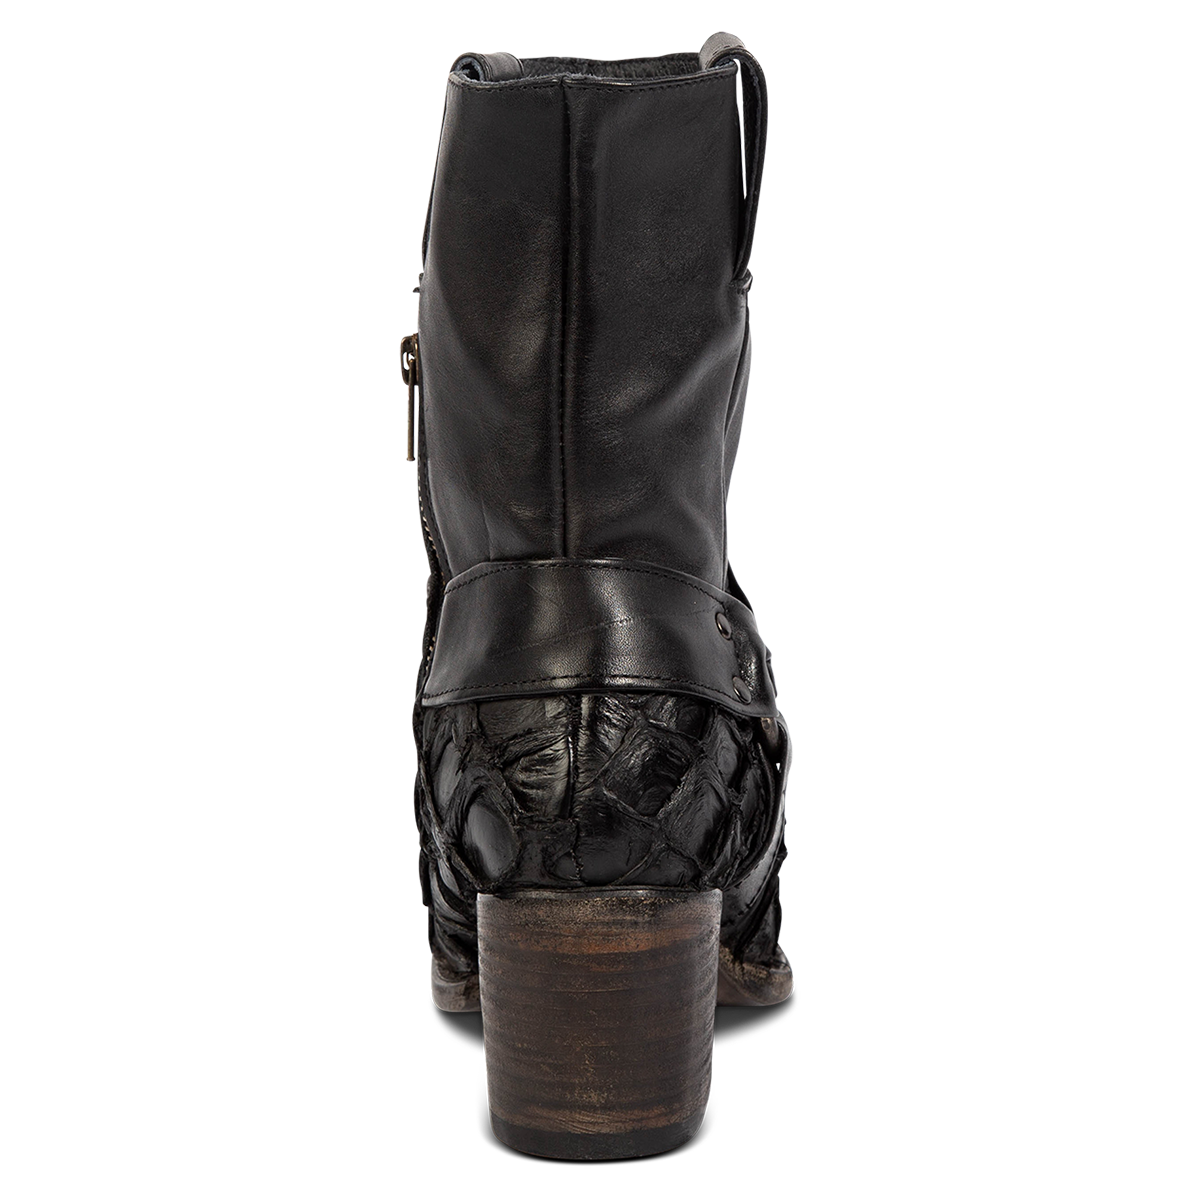 Back view showing FREEBIRD women's Darcy black fish leather boot with a studded ankle harness, leather pull straps, an inside zip closure and a square toe